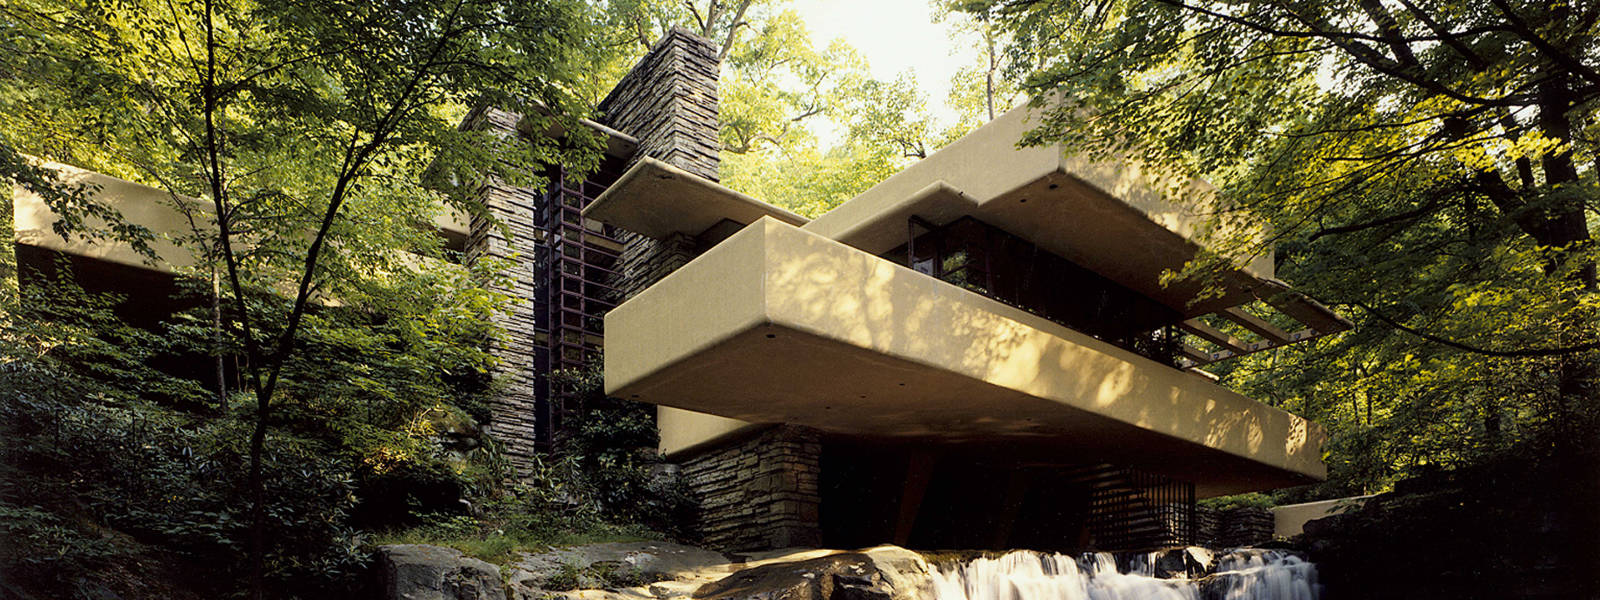 Thank you for your interest in Fallingwater!